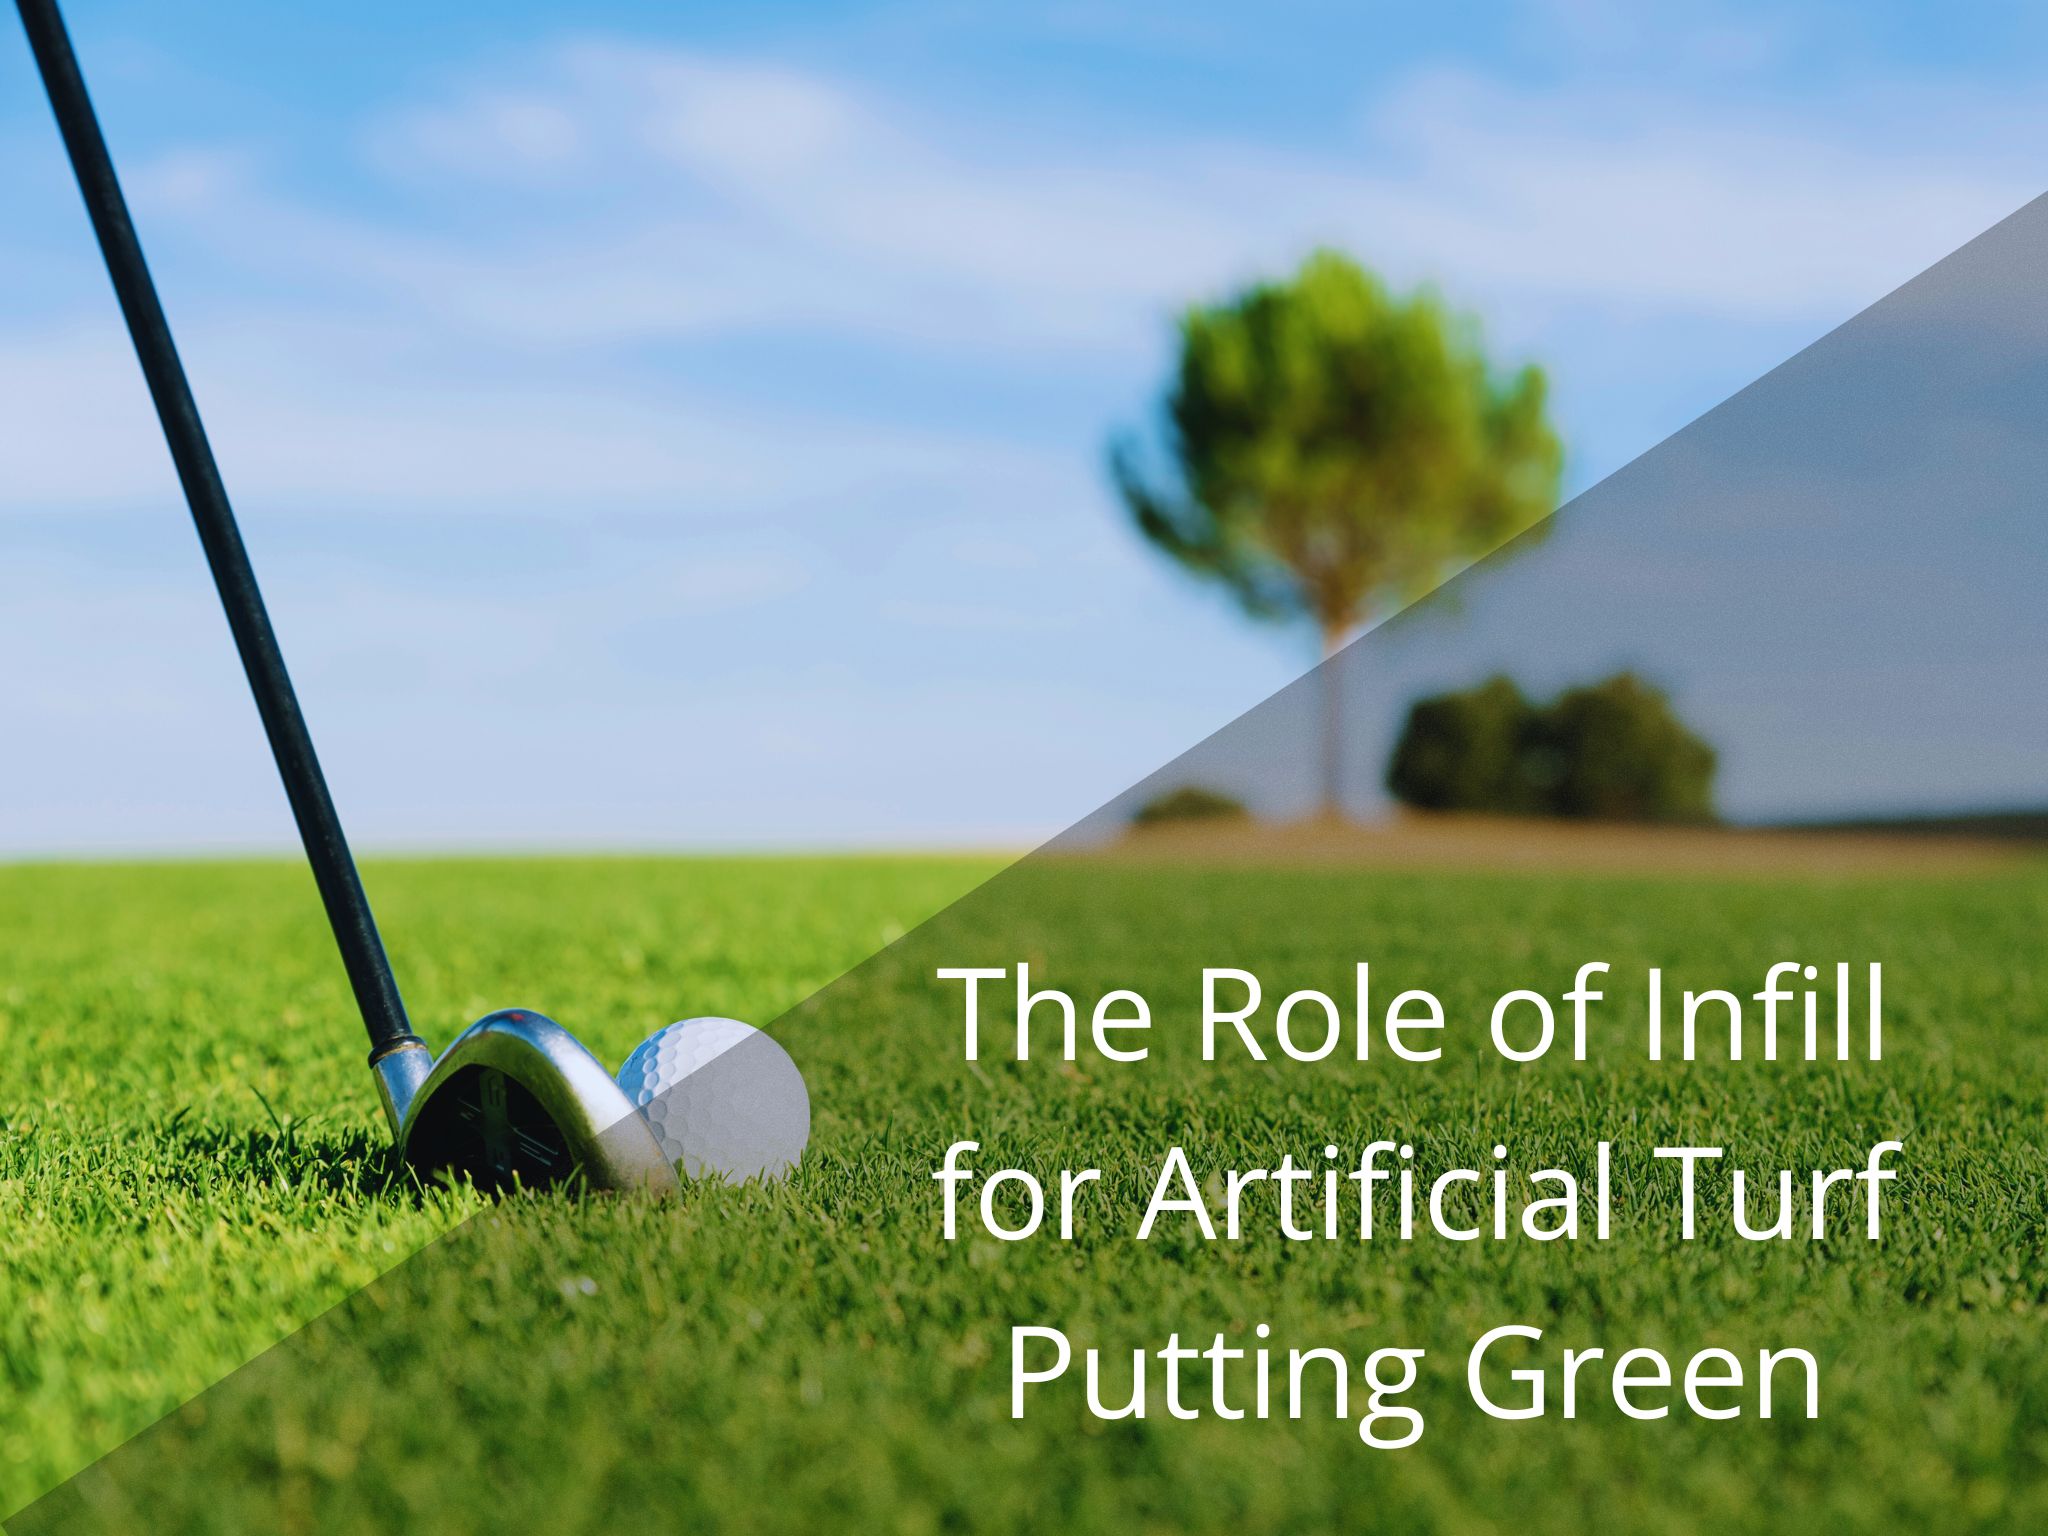 The Role of Infill for Artificial Turf Putting Green - RT 2